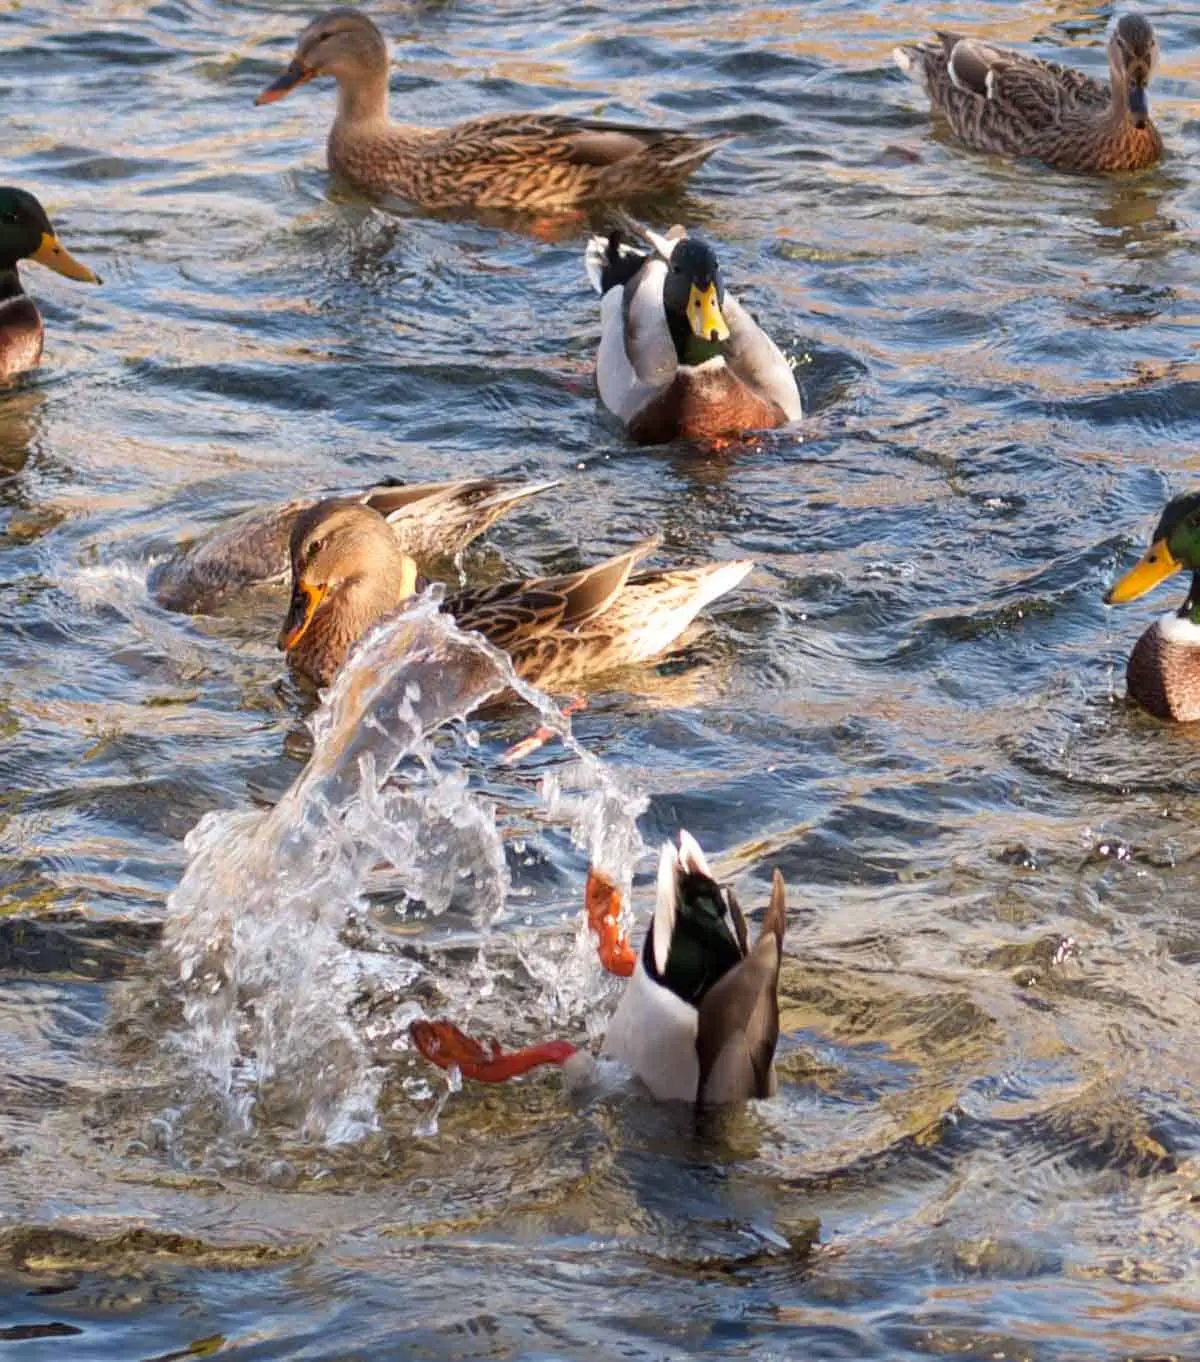 Ducks swimming in a lake with one diving into the water